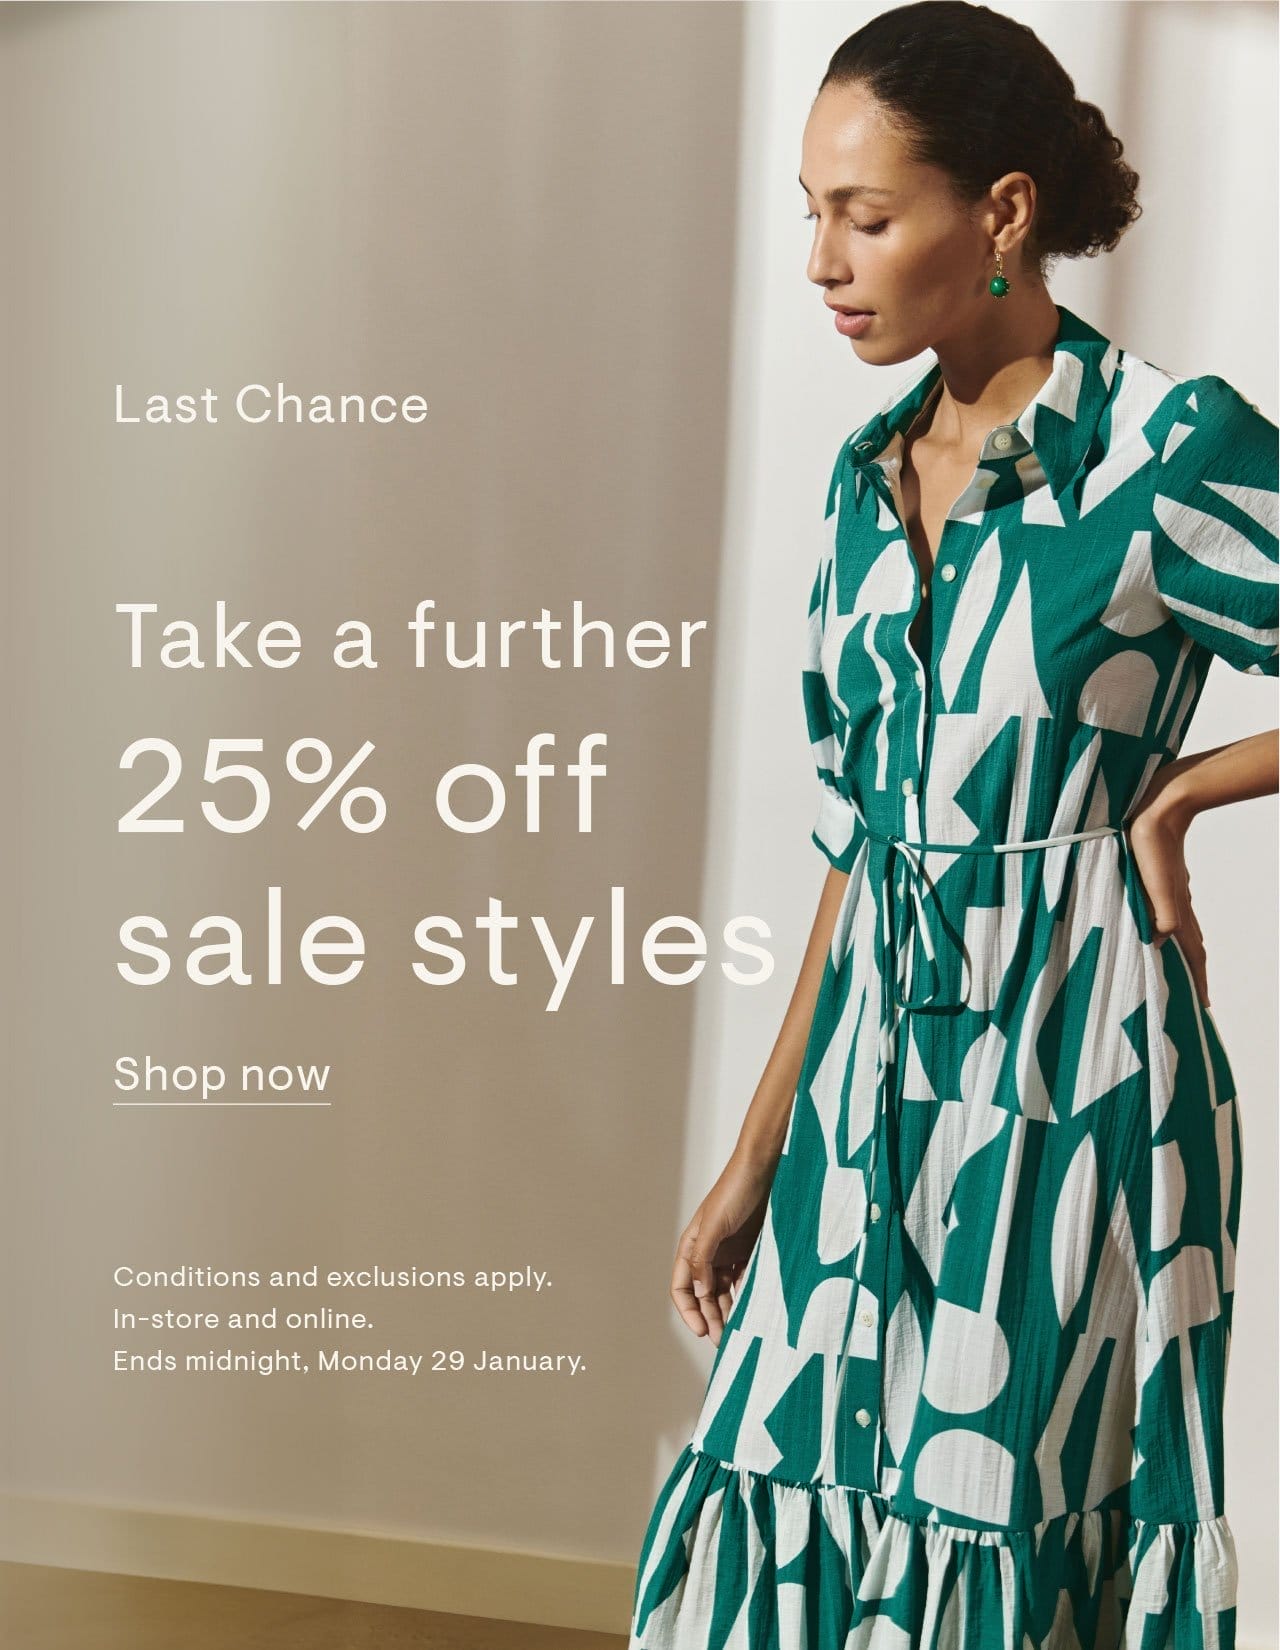 Last Chance: Take a further 25% off sale